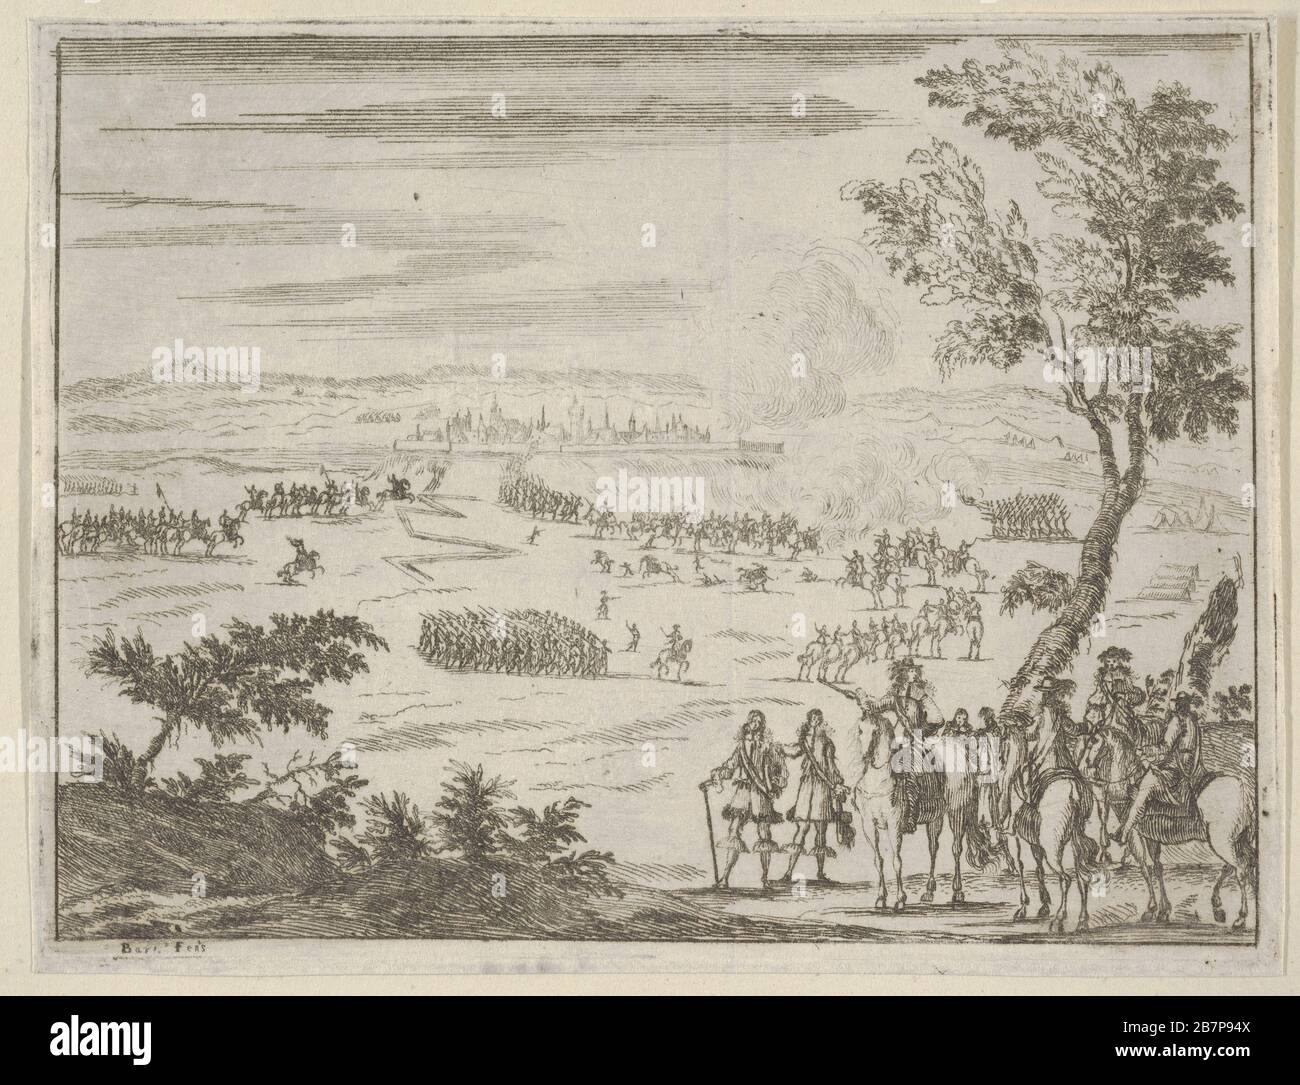 Francesco I d'Este and the French Army Besiege Valenza, which has Been Taken by the Spanish, and by Persisting with Intrepid Courage, Succeeds in the Endeavor, from L'Idea di un Principe ed Eroe Cristiano in Francesco I d'Este, di Modena e Reggio Duca VIII [...], 1659. Stock Photo